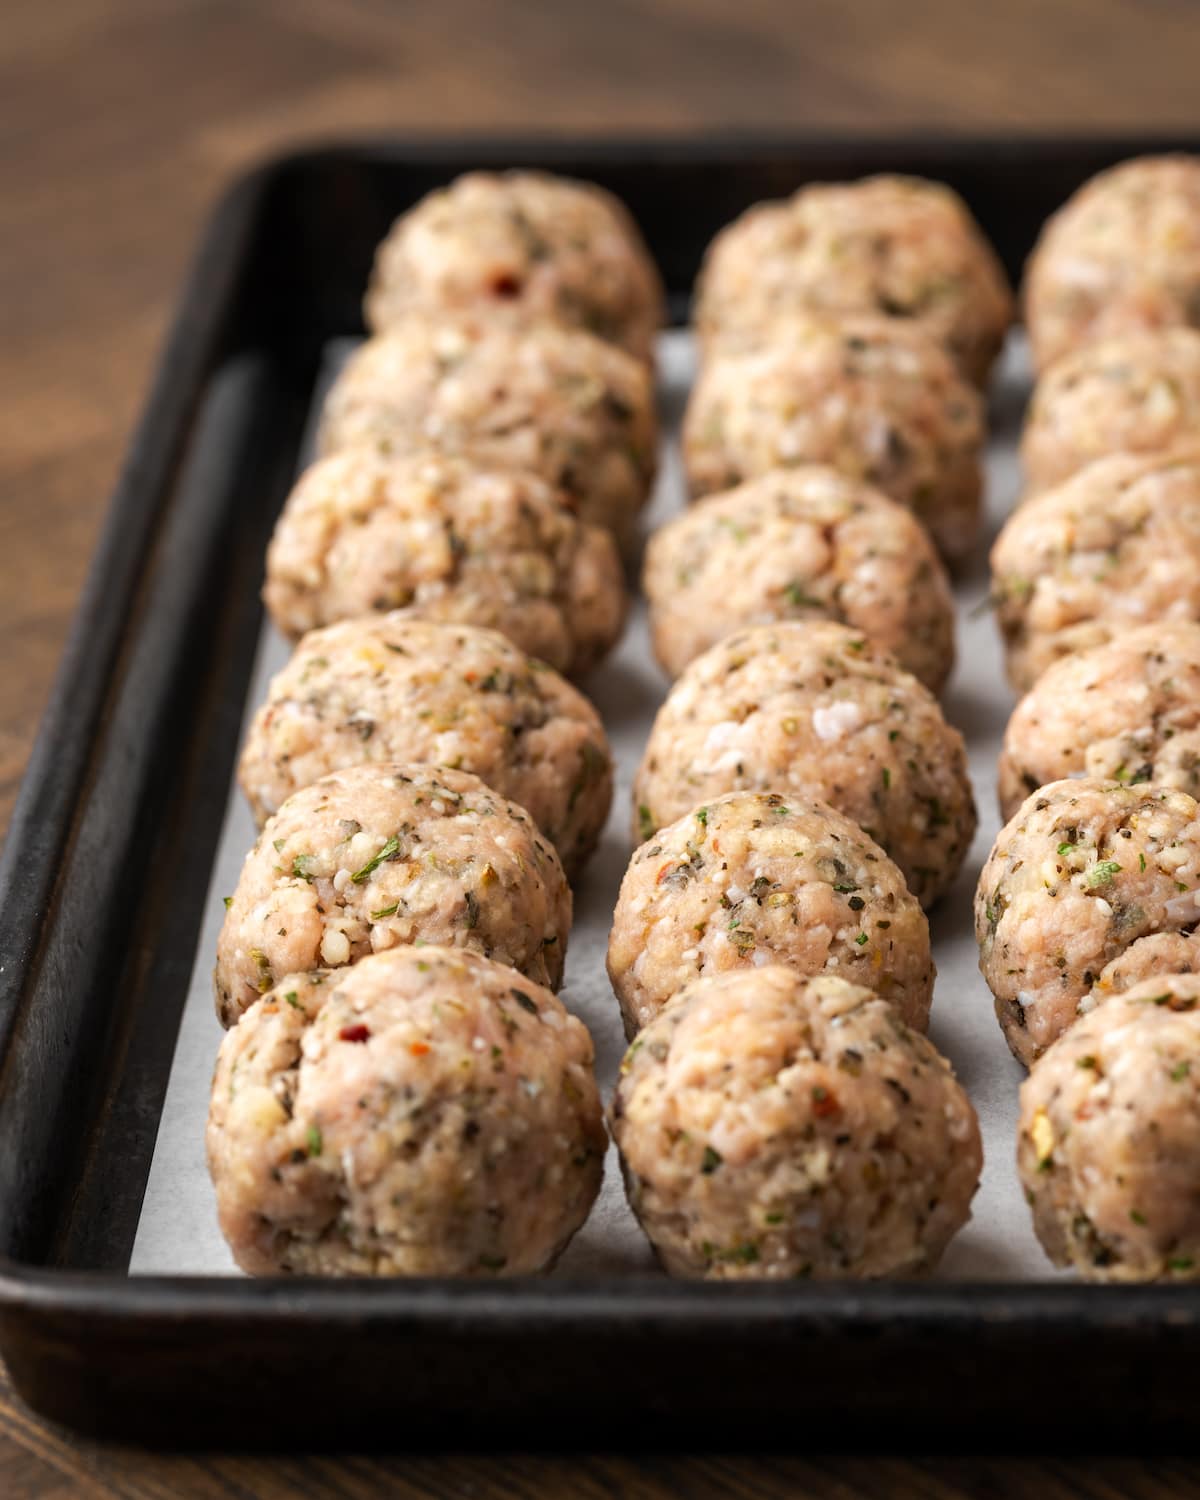 Rows of rolled turkey meatballs on a parchment-lined baking sheet.